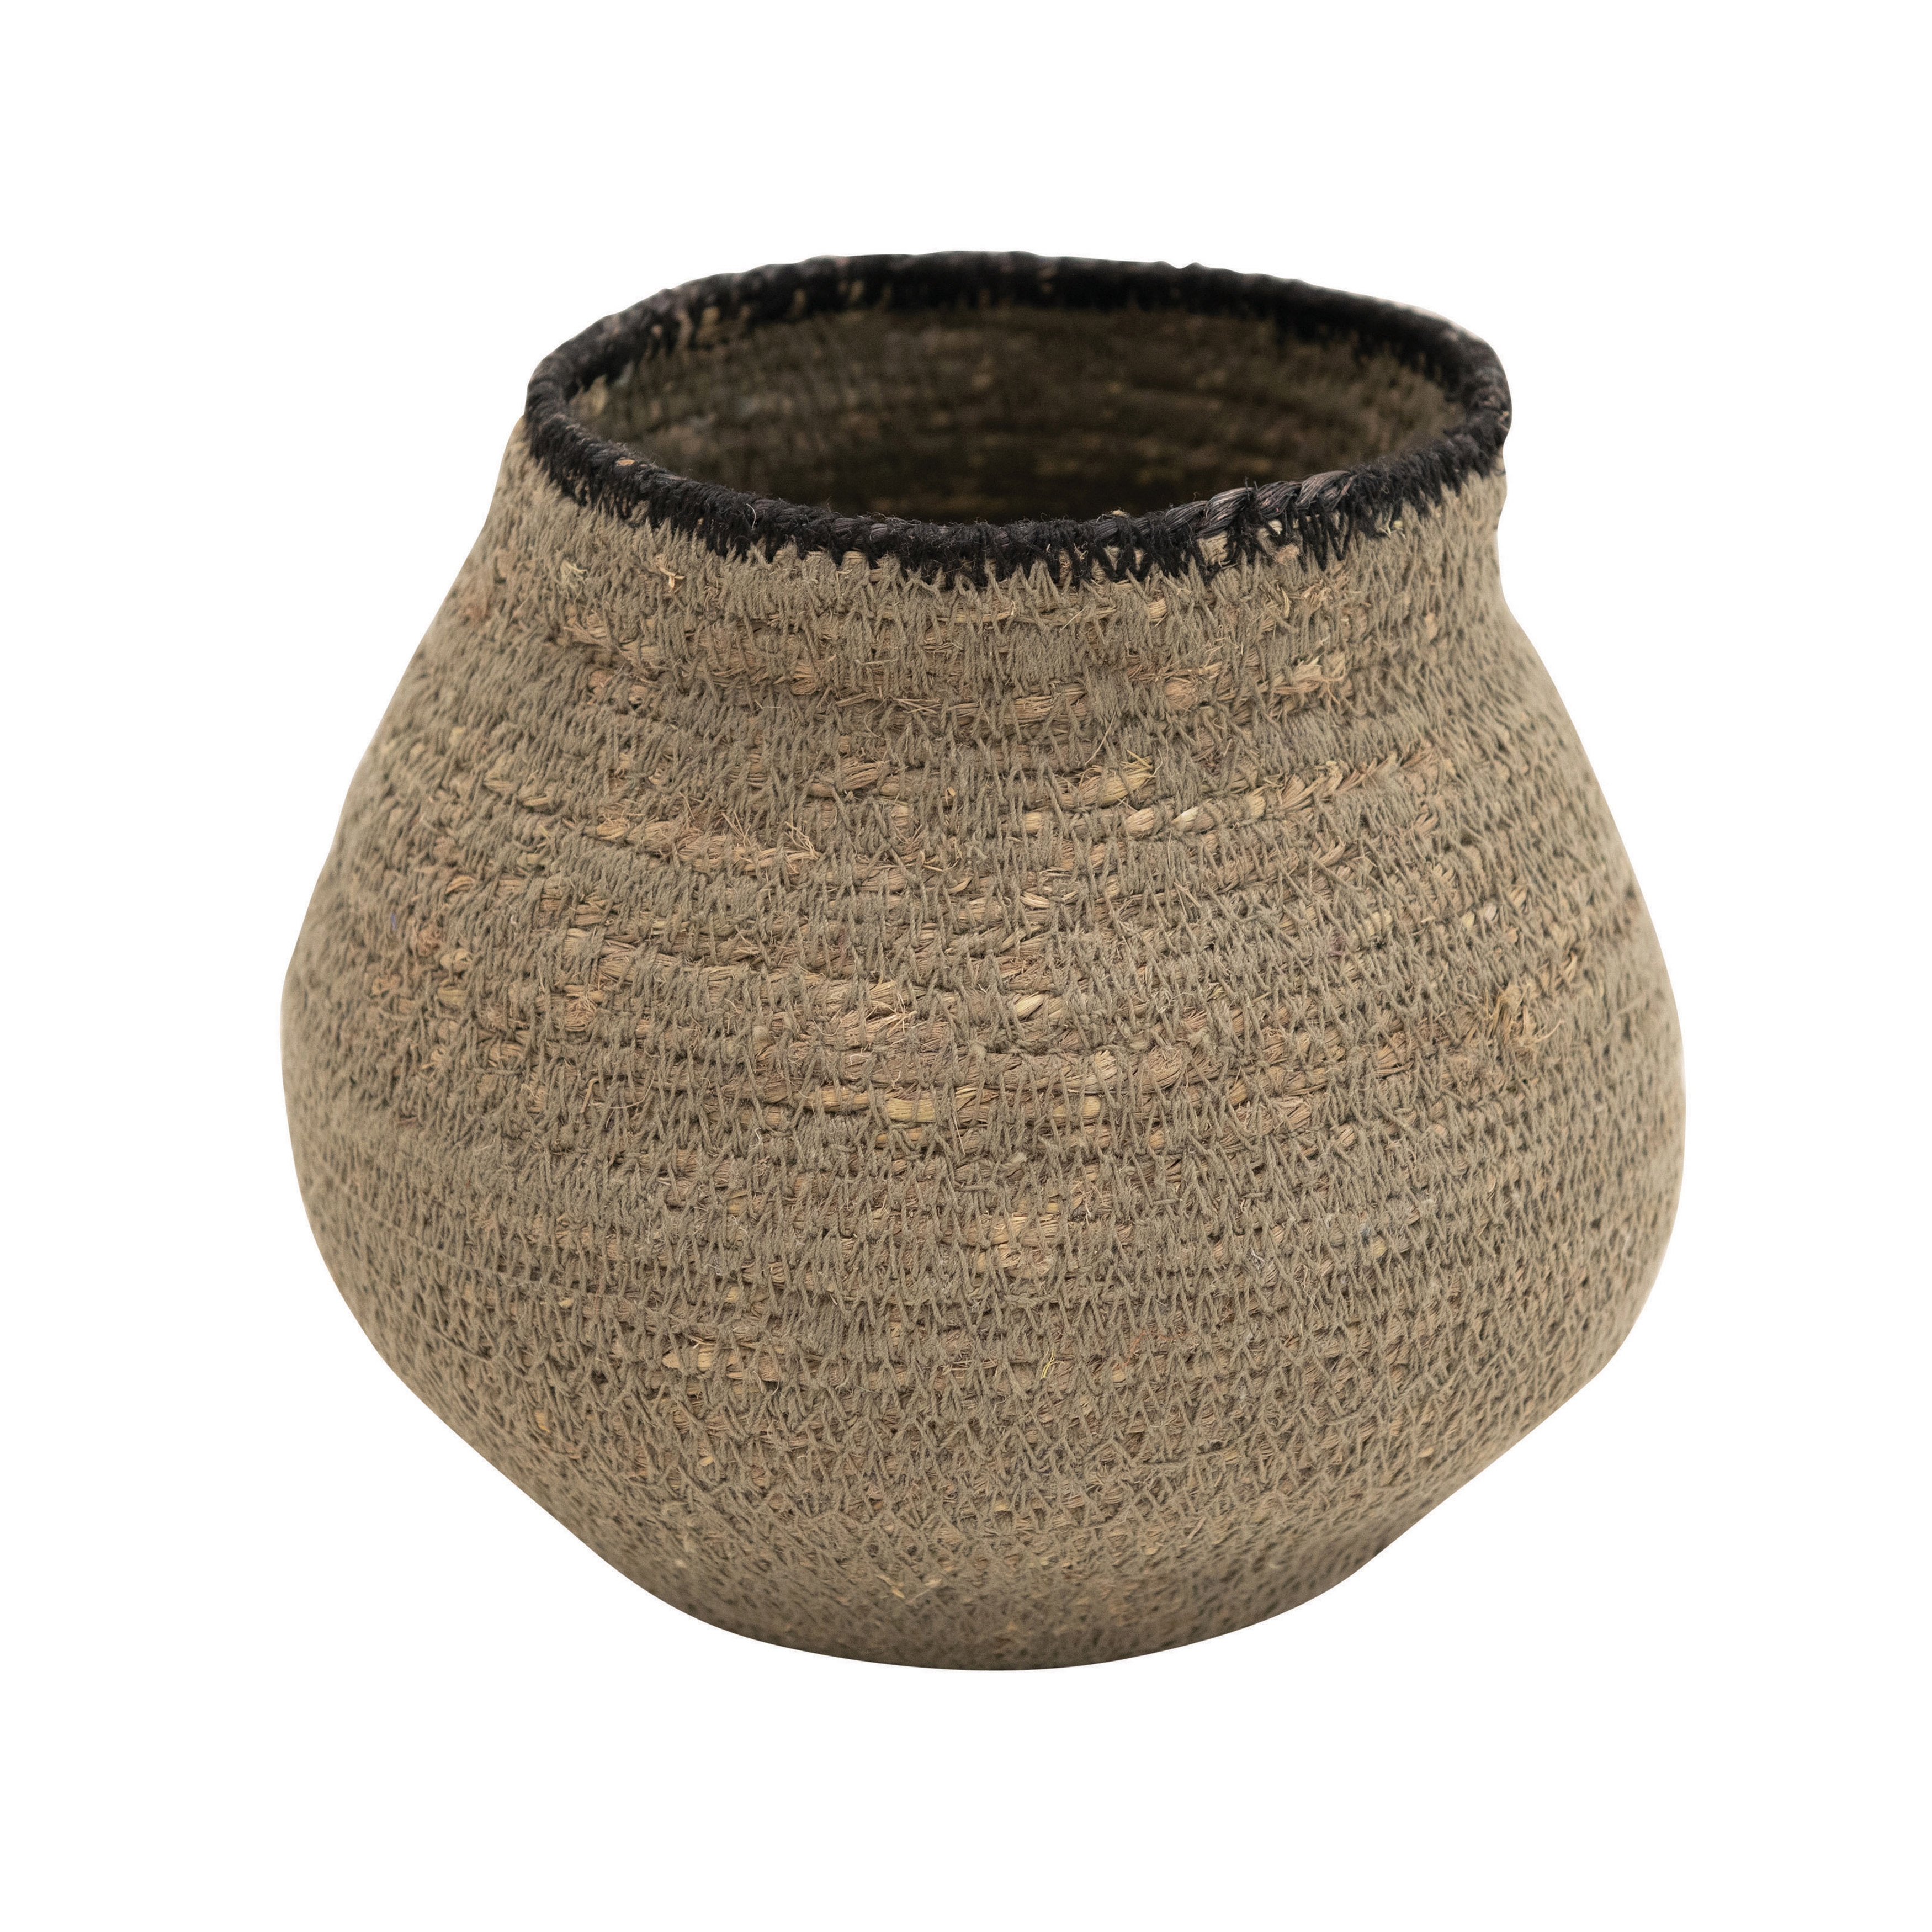 Hand-Woven Seagrass Basket, Grey & Black - Image 0